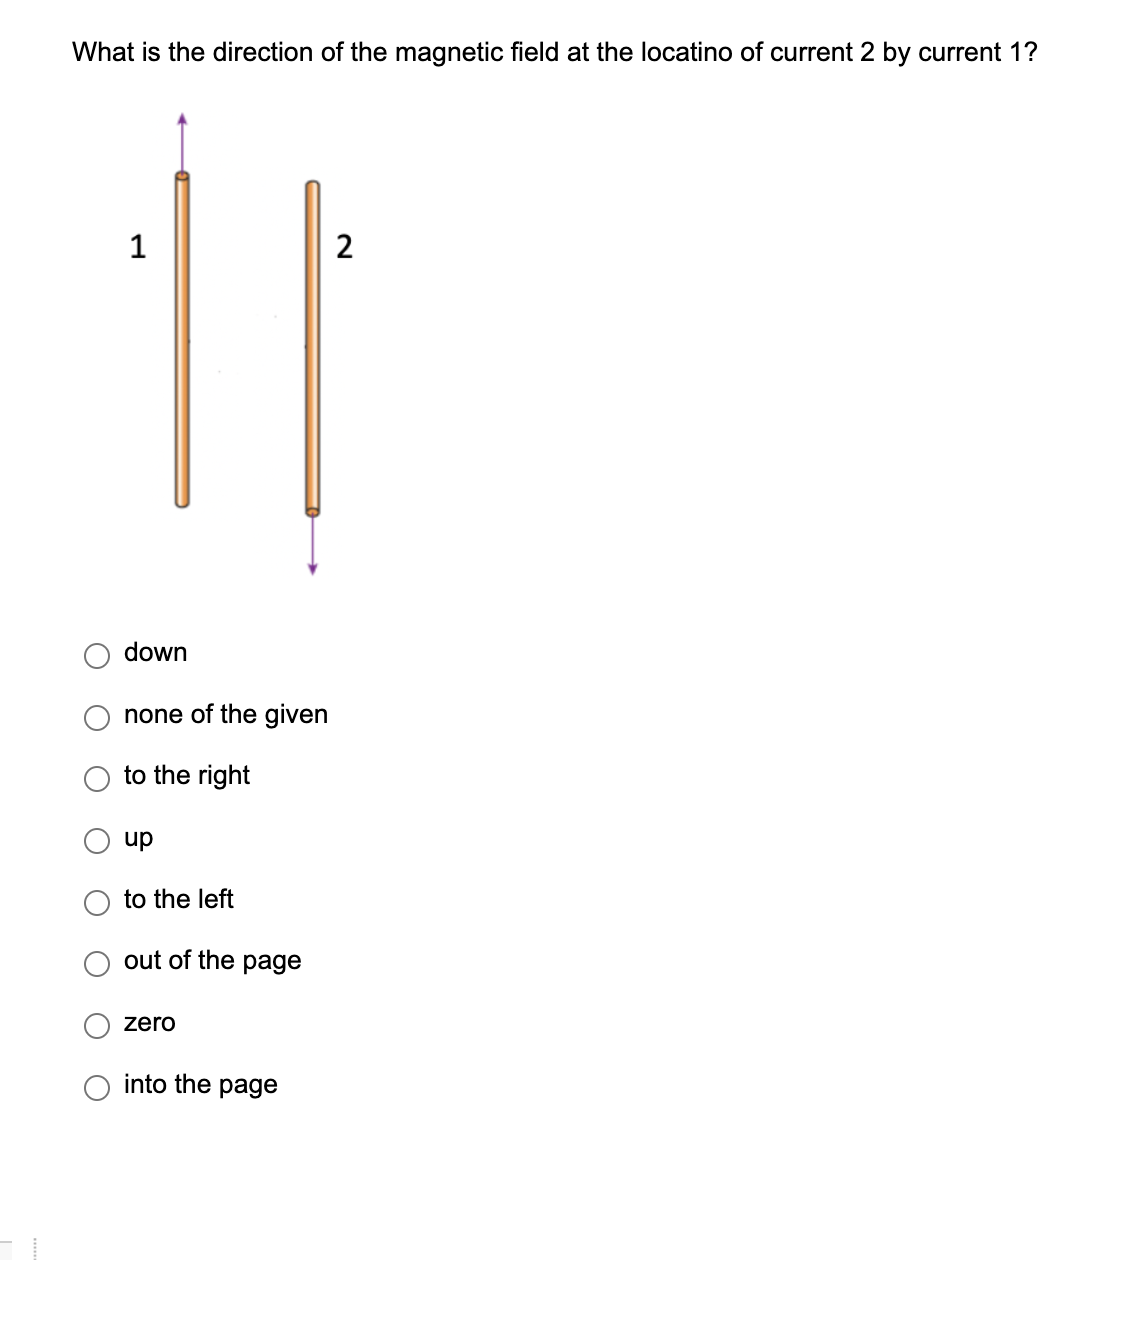 What is the direction of the magnetic field at the locatino of current 2 by current 1?
1
down
none of the given
to the right
up
to the left
out of the page
zero
into the page
2